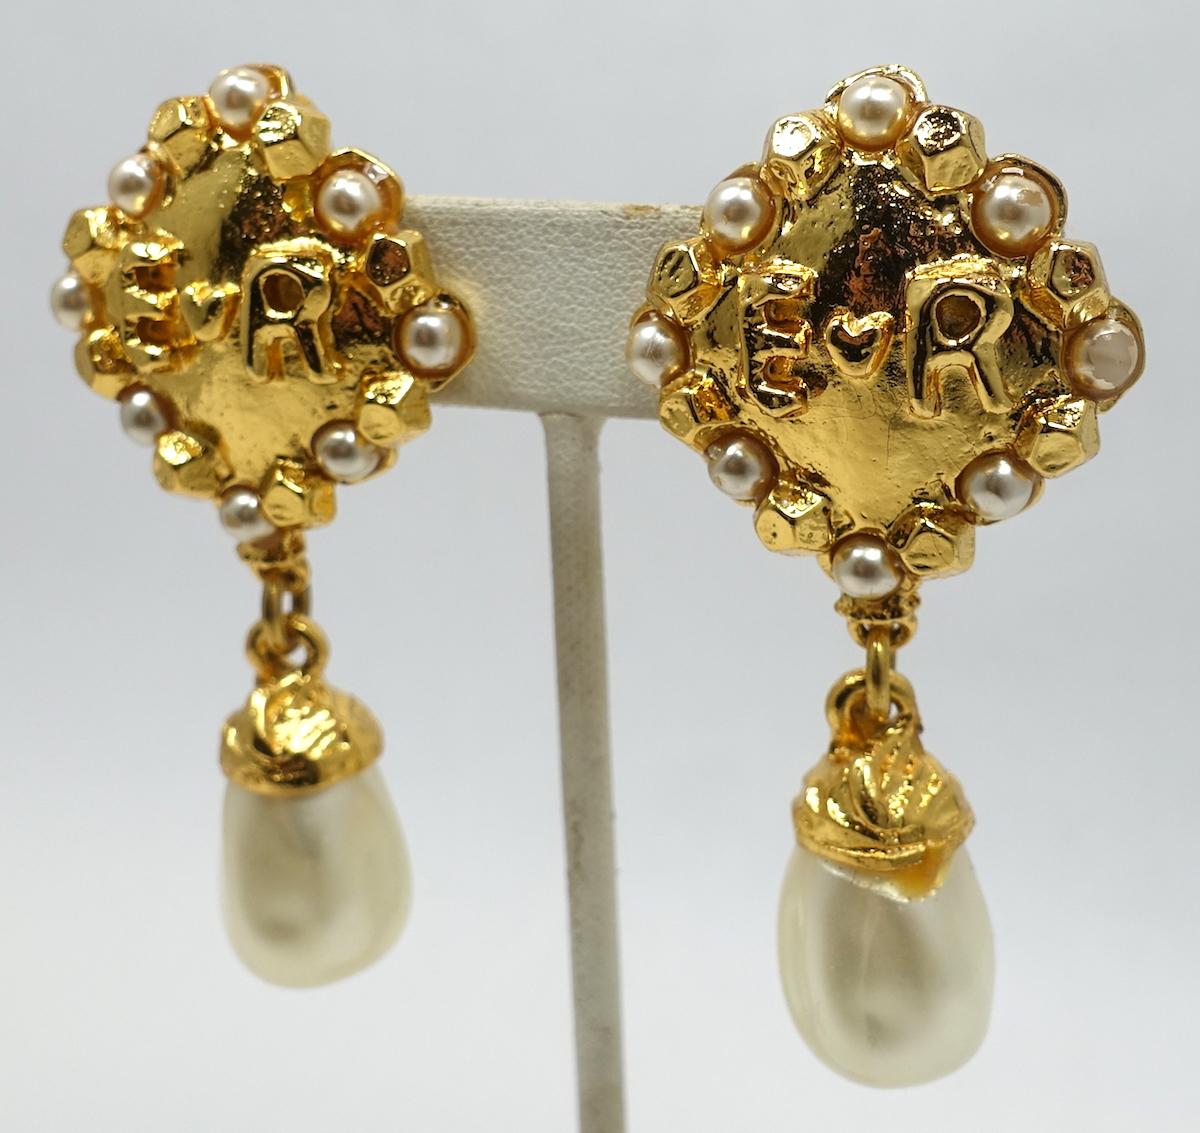 Vintage Signed Edouard Rambaud Dangling Faux Pearl Earrings In Good Condition For Sale In New York, NY